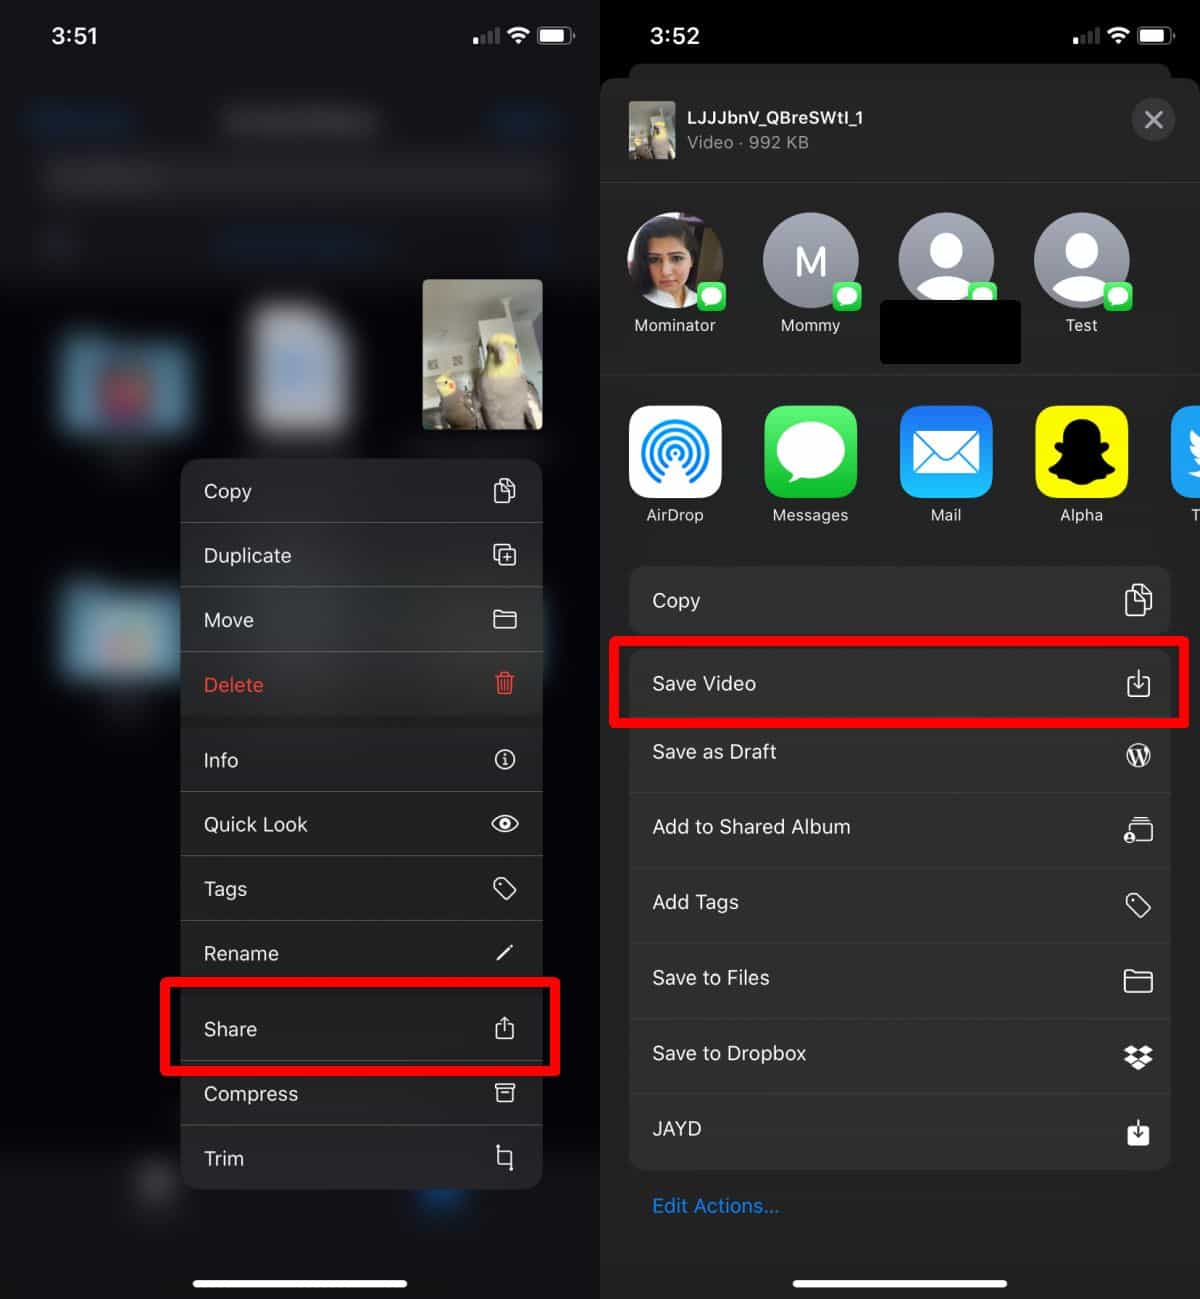 How to download  Video to iPhone